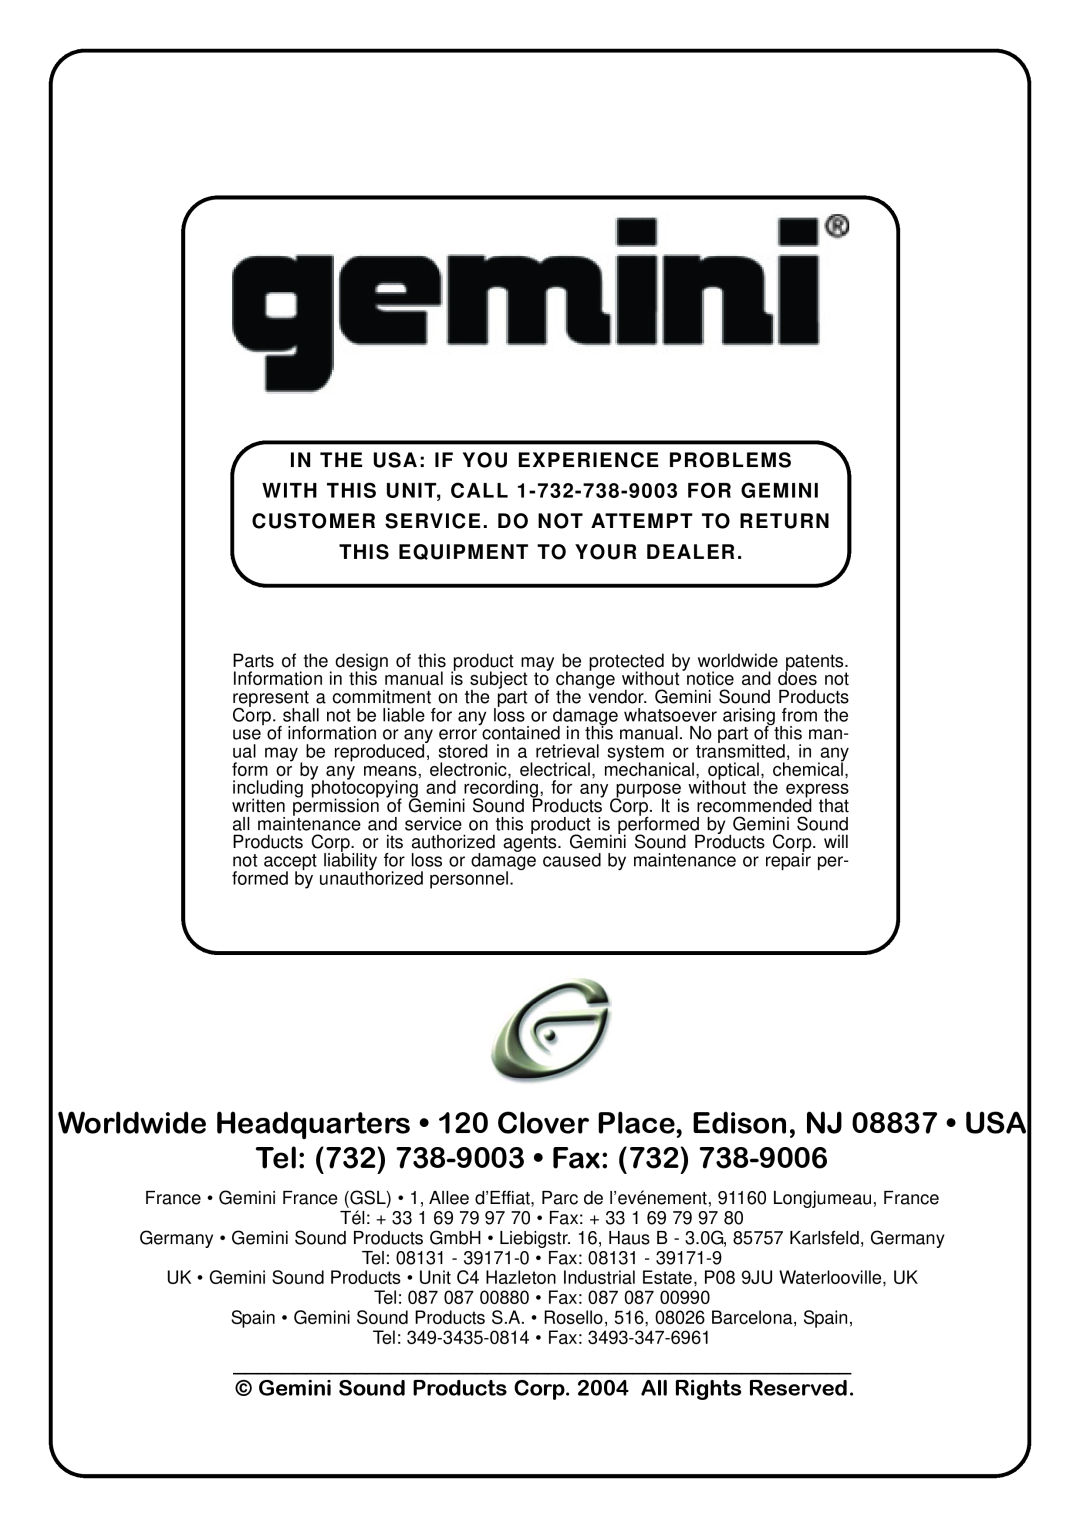 Gemini iTT In The Usa If You Experience Problems, WITH THIS UNIT, CALL 1-732-738-9003FOR GEMINI, Tel 732 738-9003 Fax 